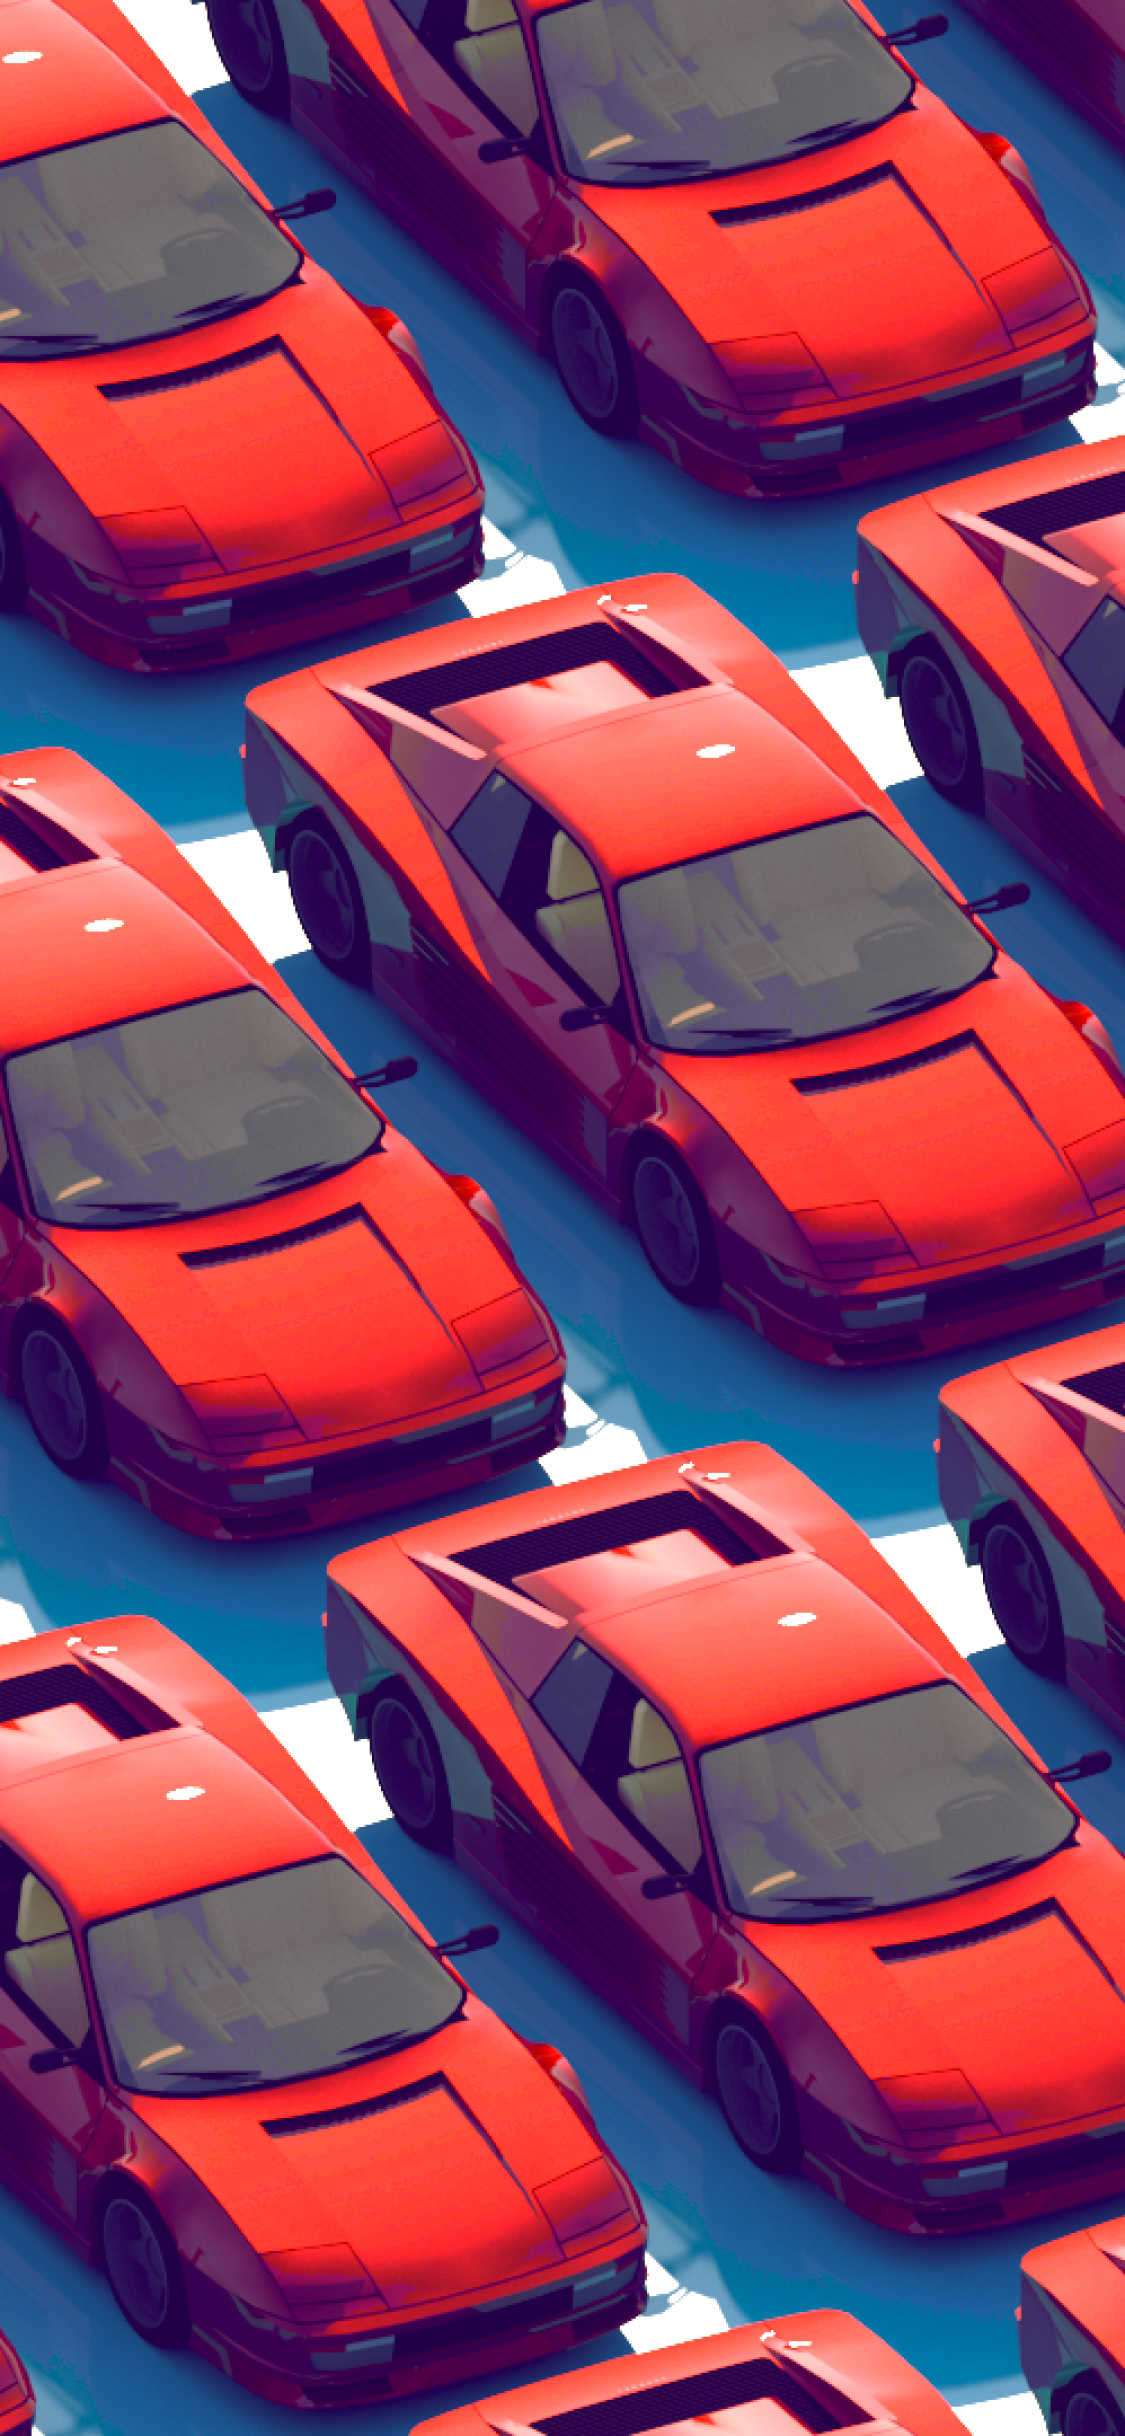 Download 1125x2436 Retrowave Cars, Artwork, Synthwave Wallpaper for iPhone X